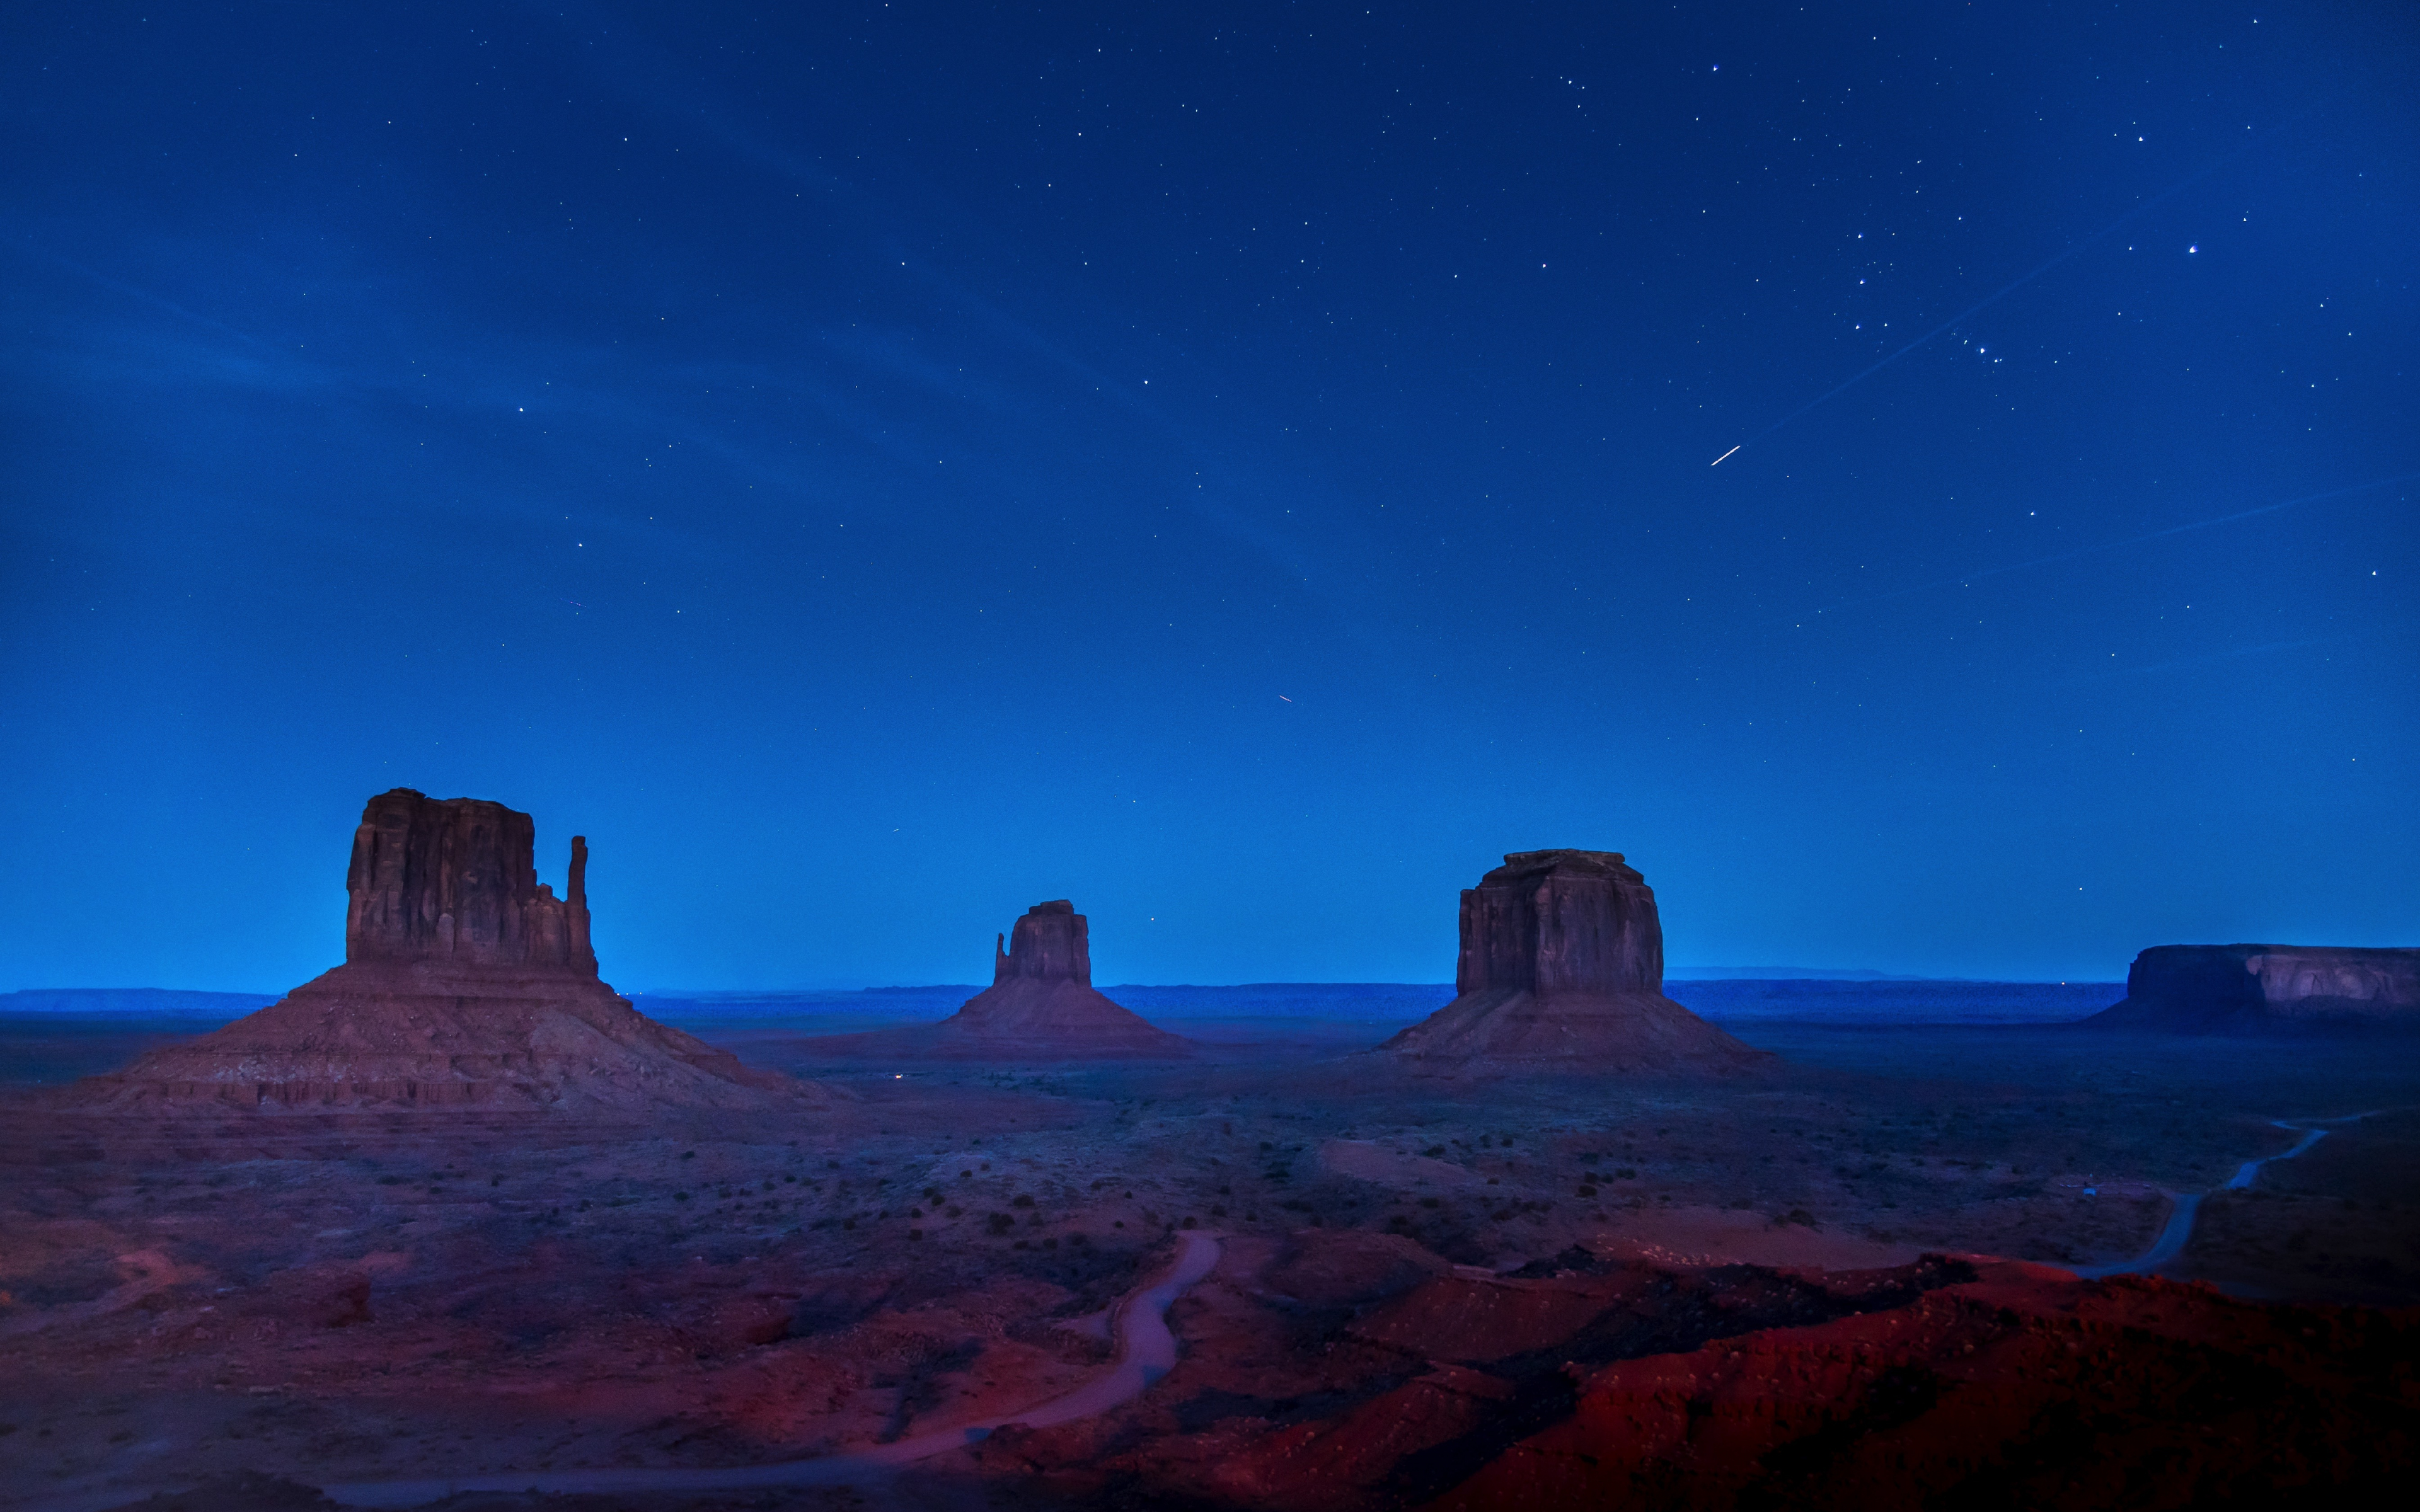 Download 3840x2400 Wallpaper Landscape Monument Valley Usa Night 4k